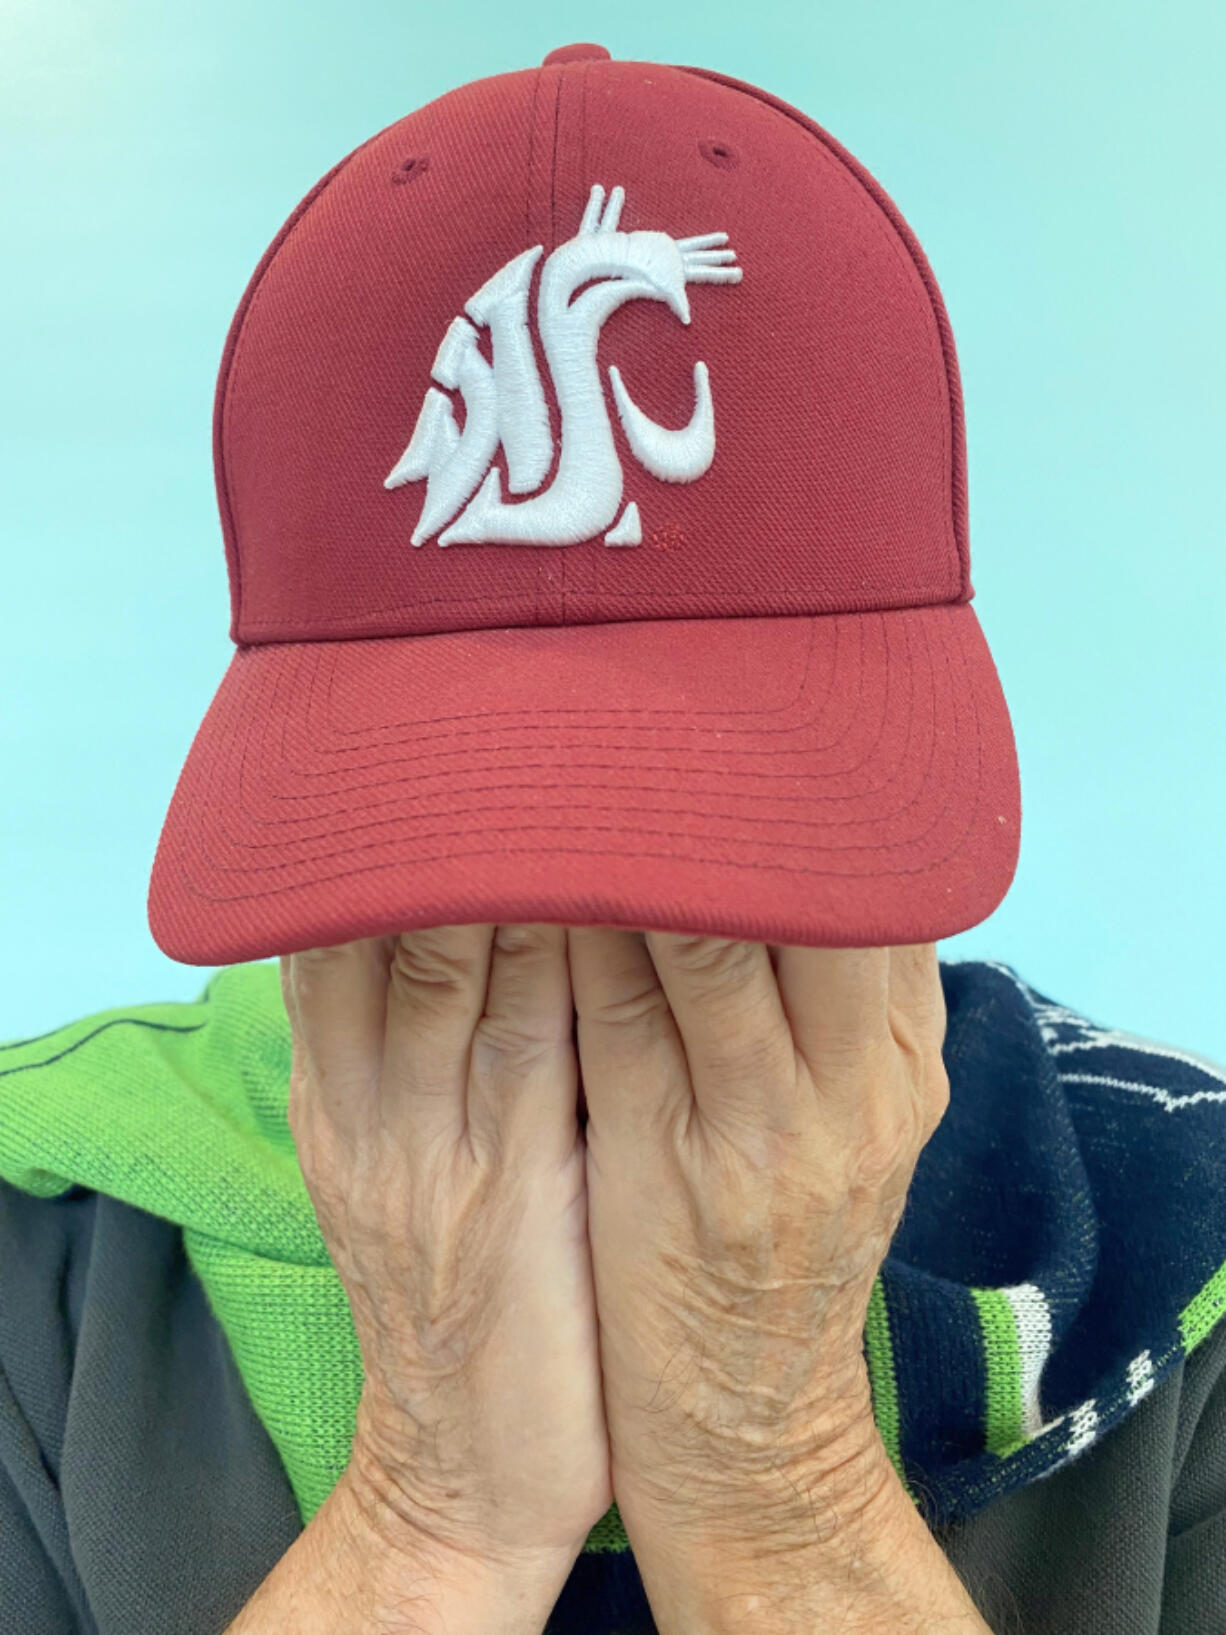 Can WSU dig its way out of being second fiddle in Washington?